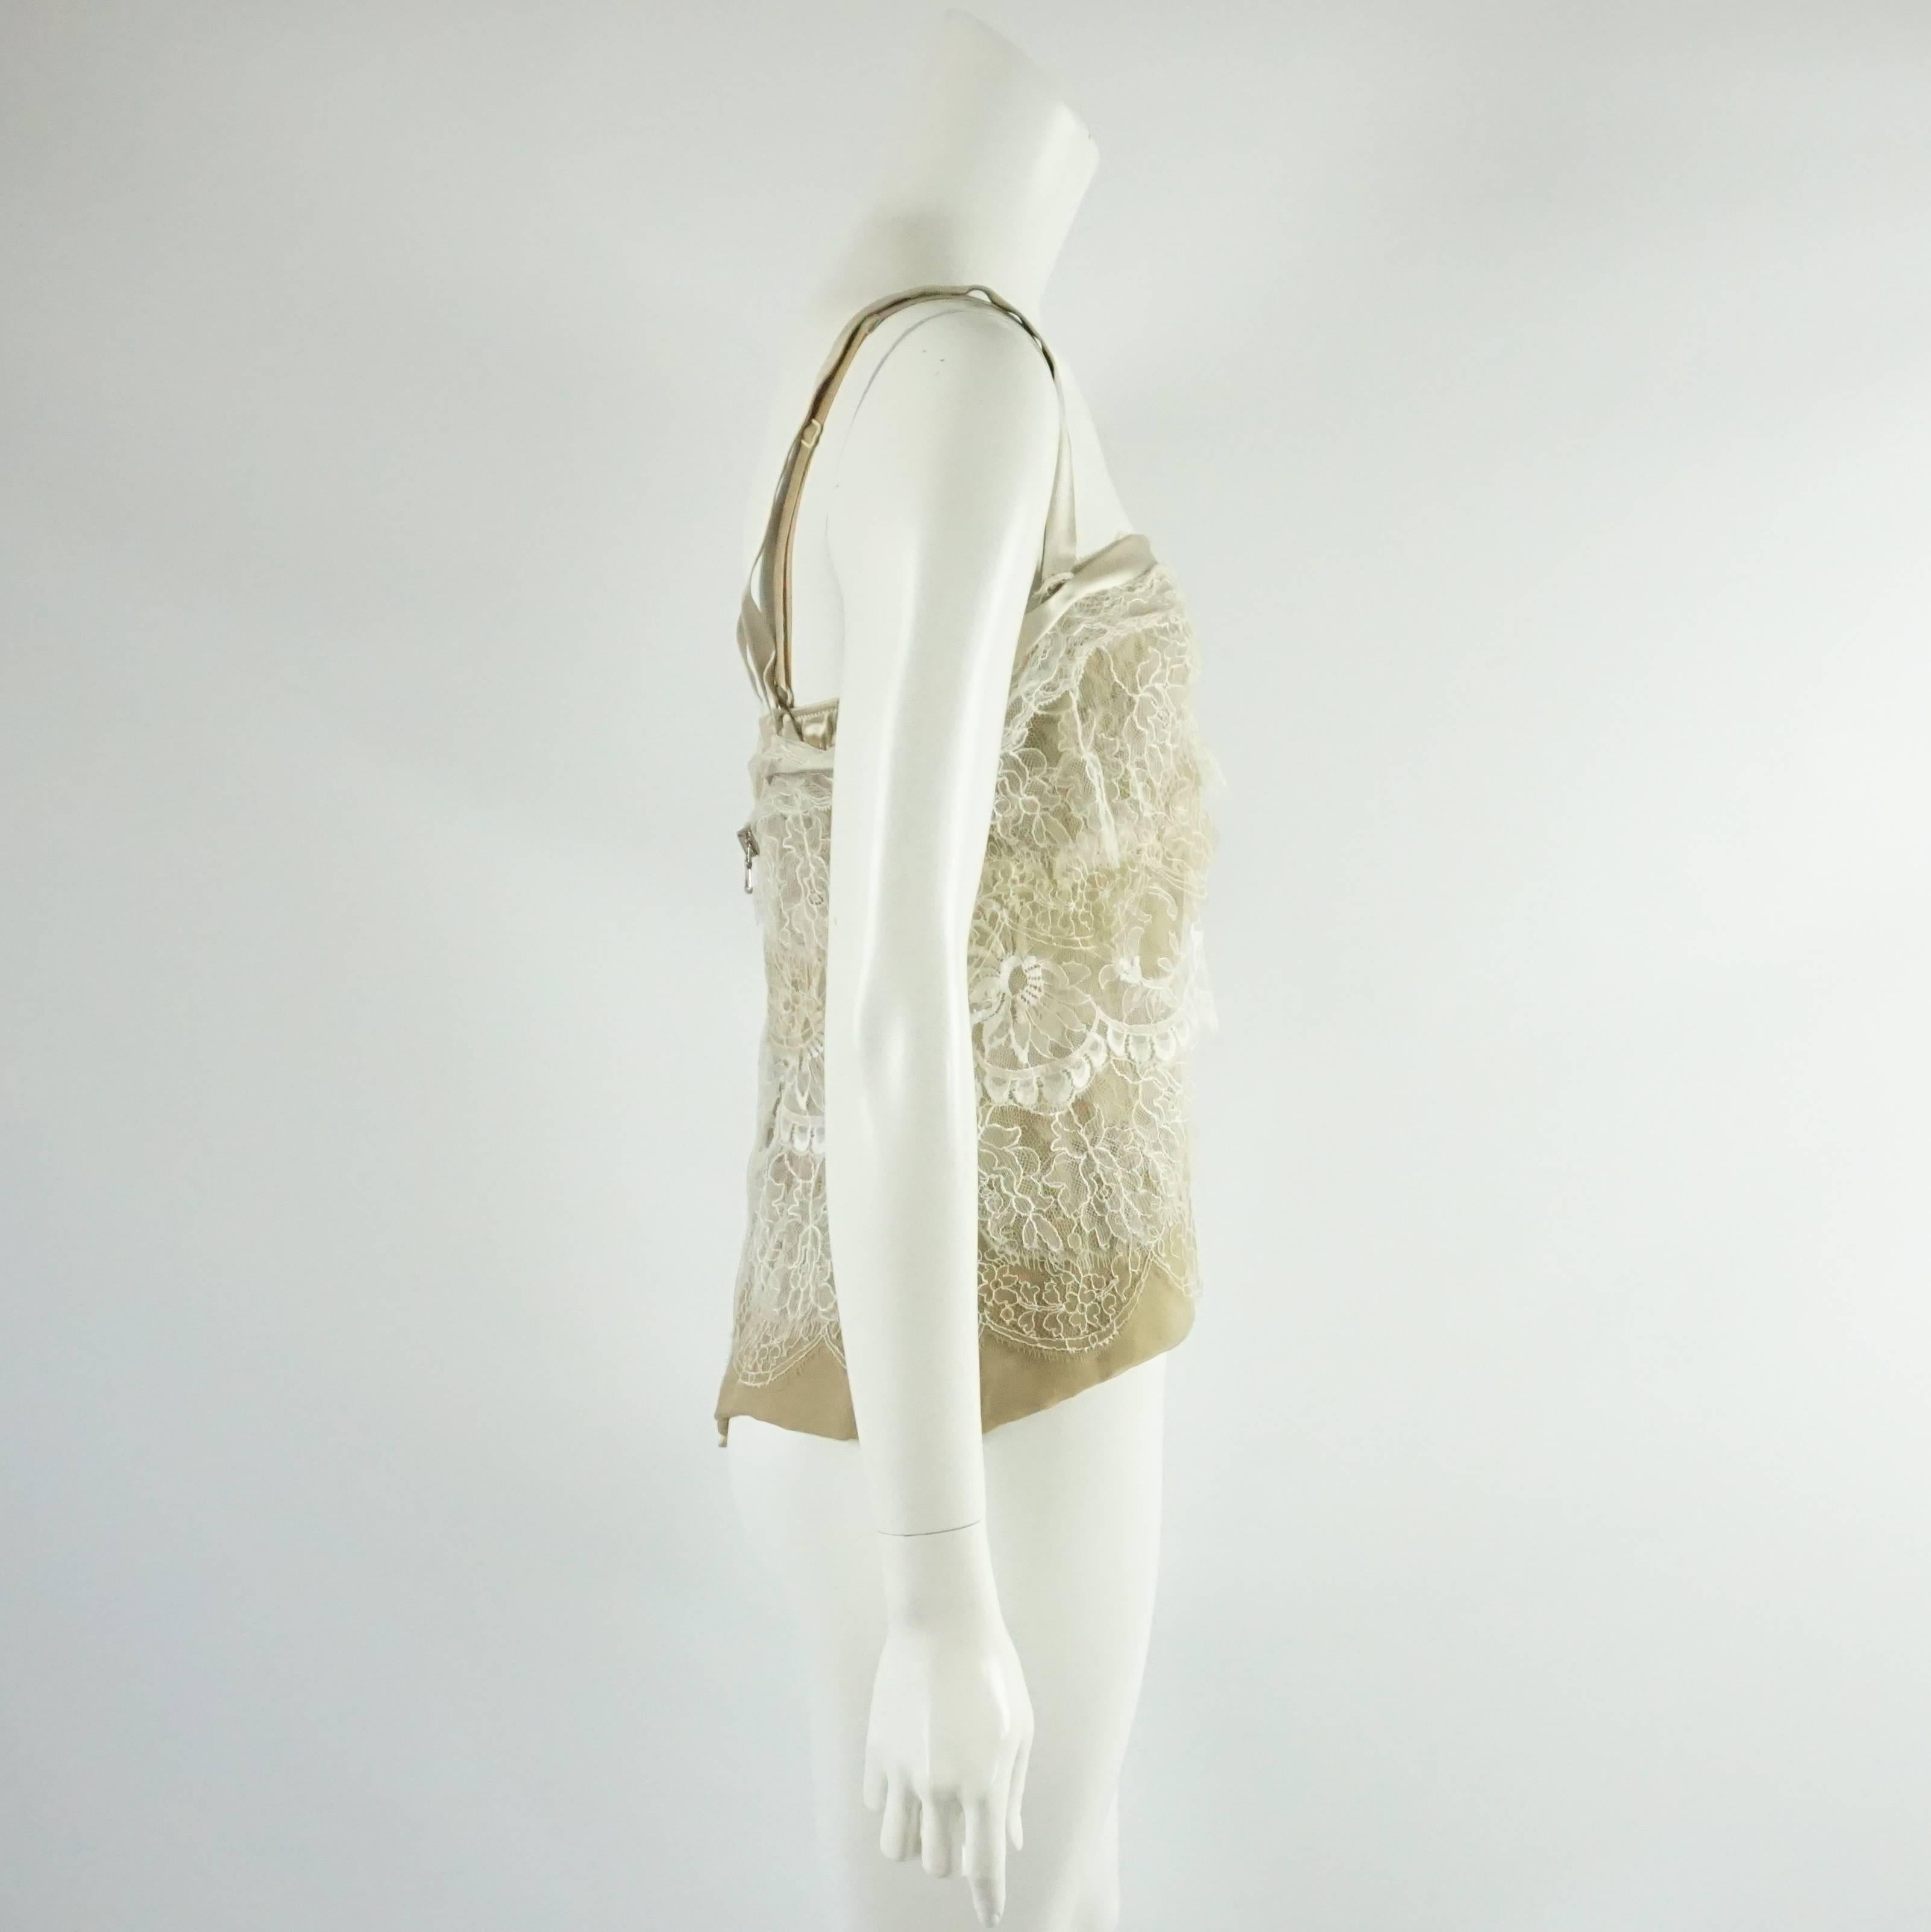 This Dolce & Gabbana camisole has a built-in bra and is tan with ivory lace. It has a silk trim. This camisole is in excellent condition.

Measurements
Bust: 33